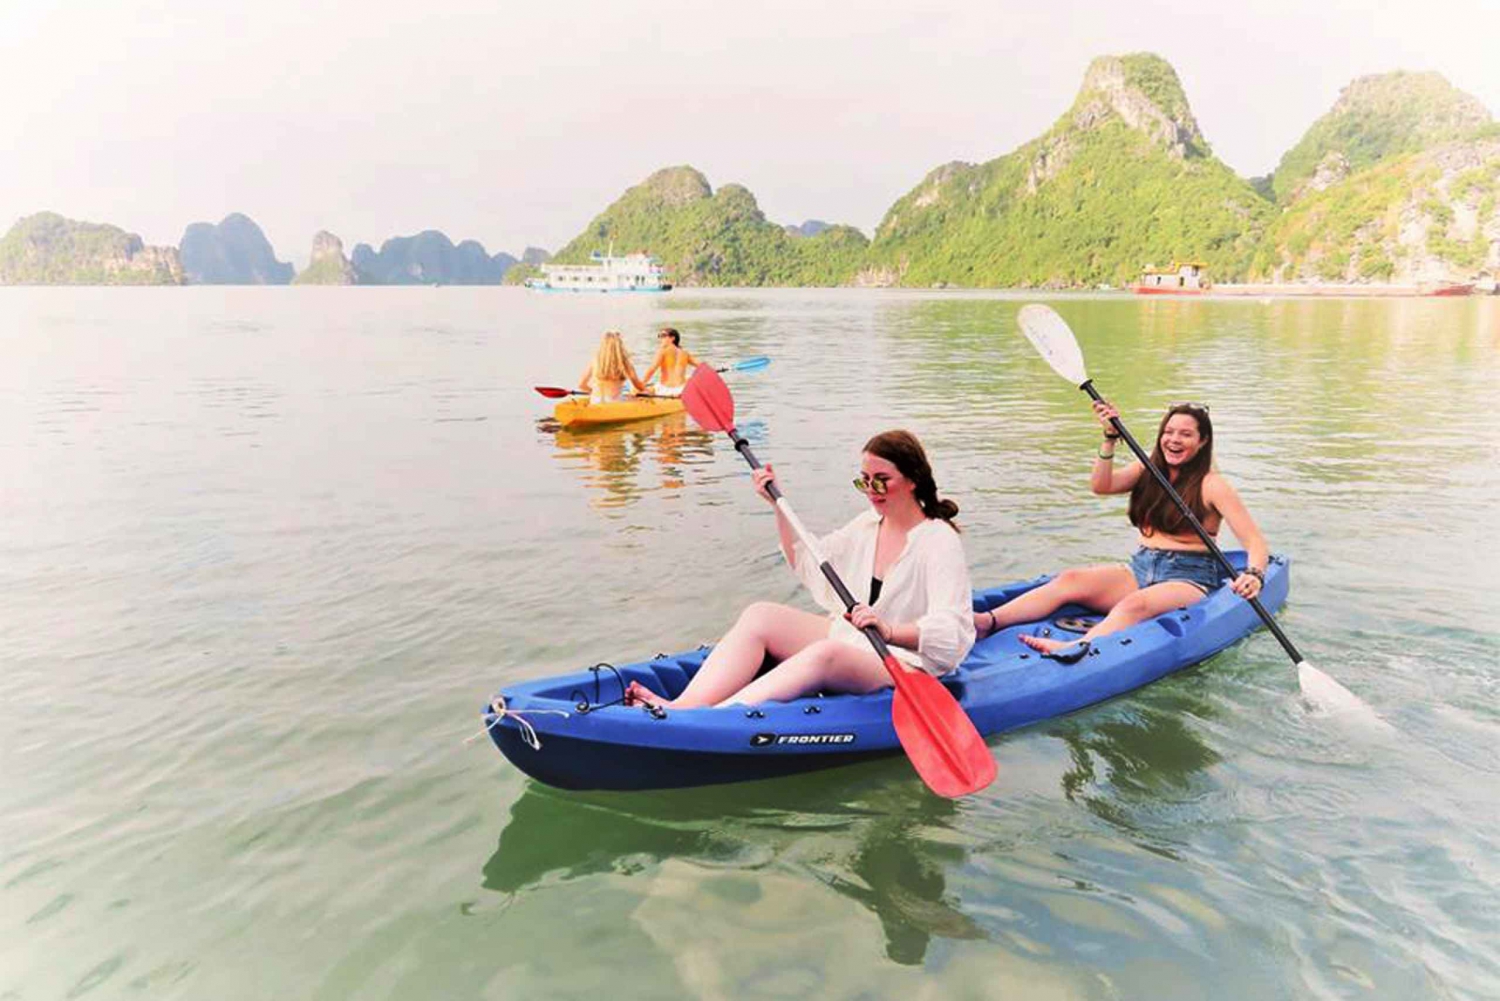 Halong Bay: Overnight Cruise With Meals